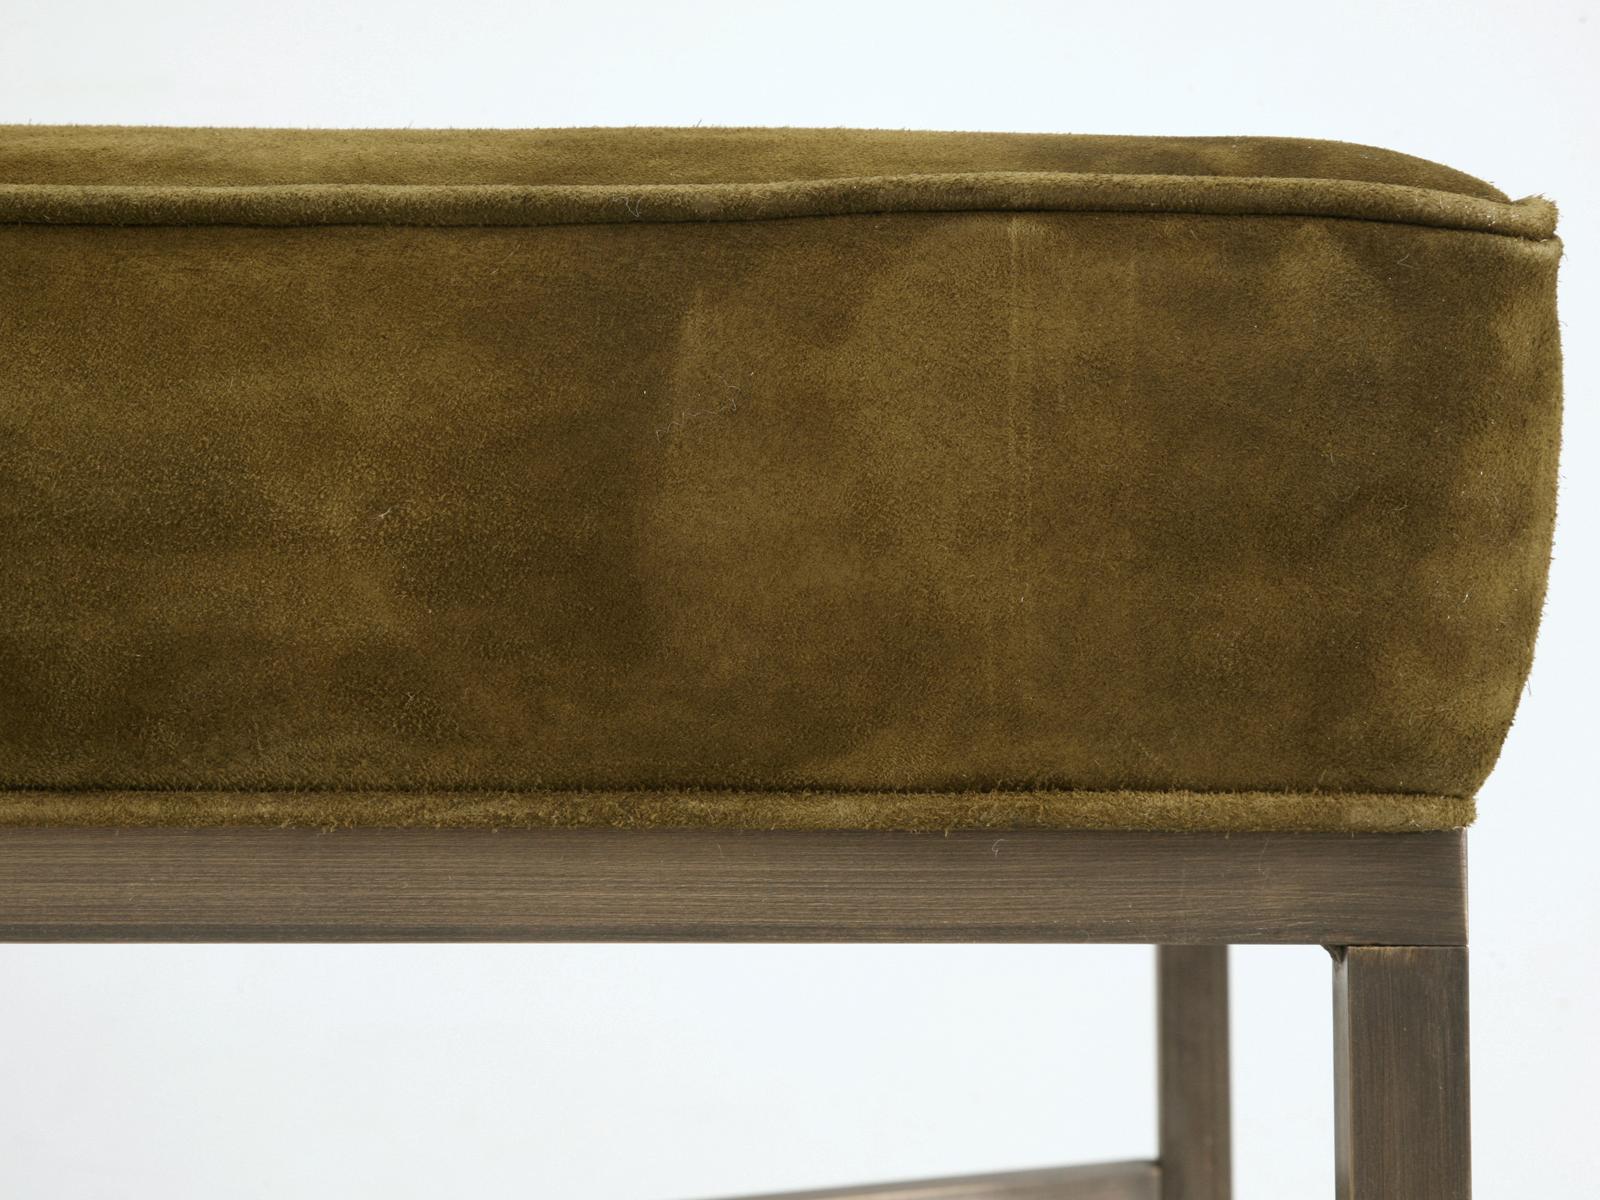 American Custom Handmade Bronze Upholstered Bench or Ottoman in Any Dimension or Finish